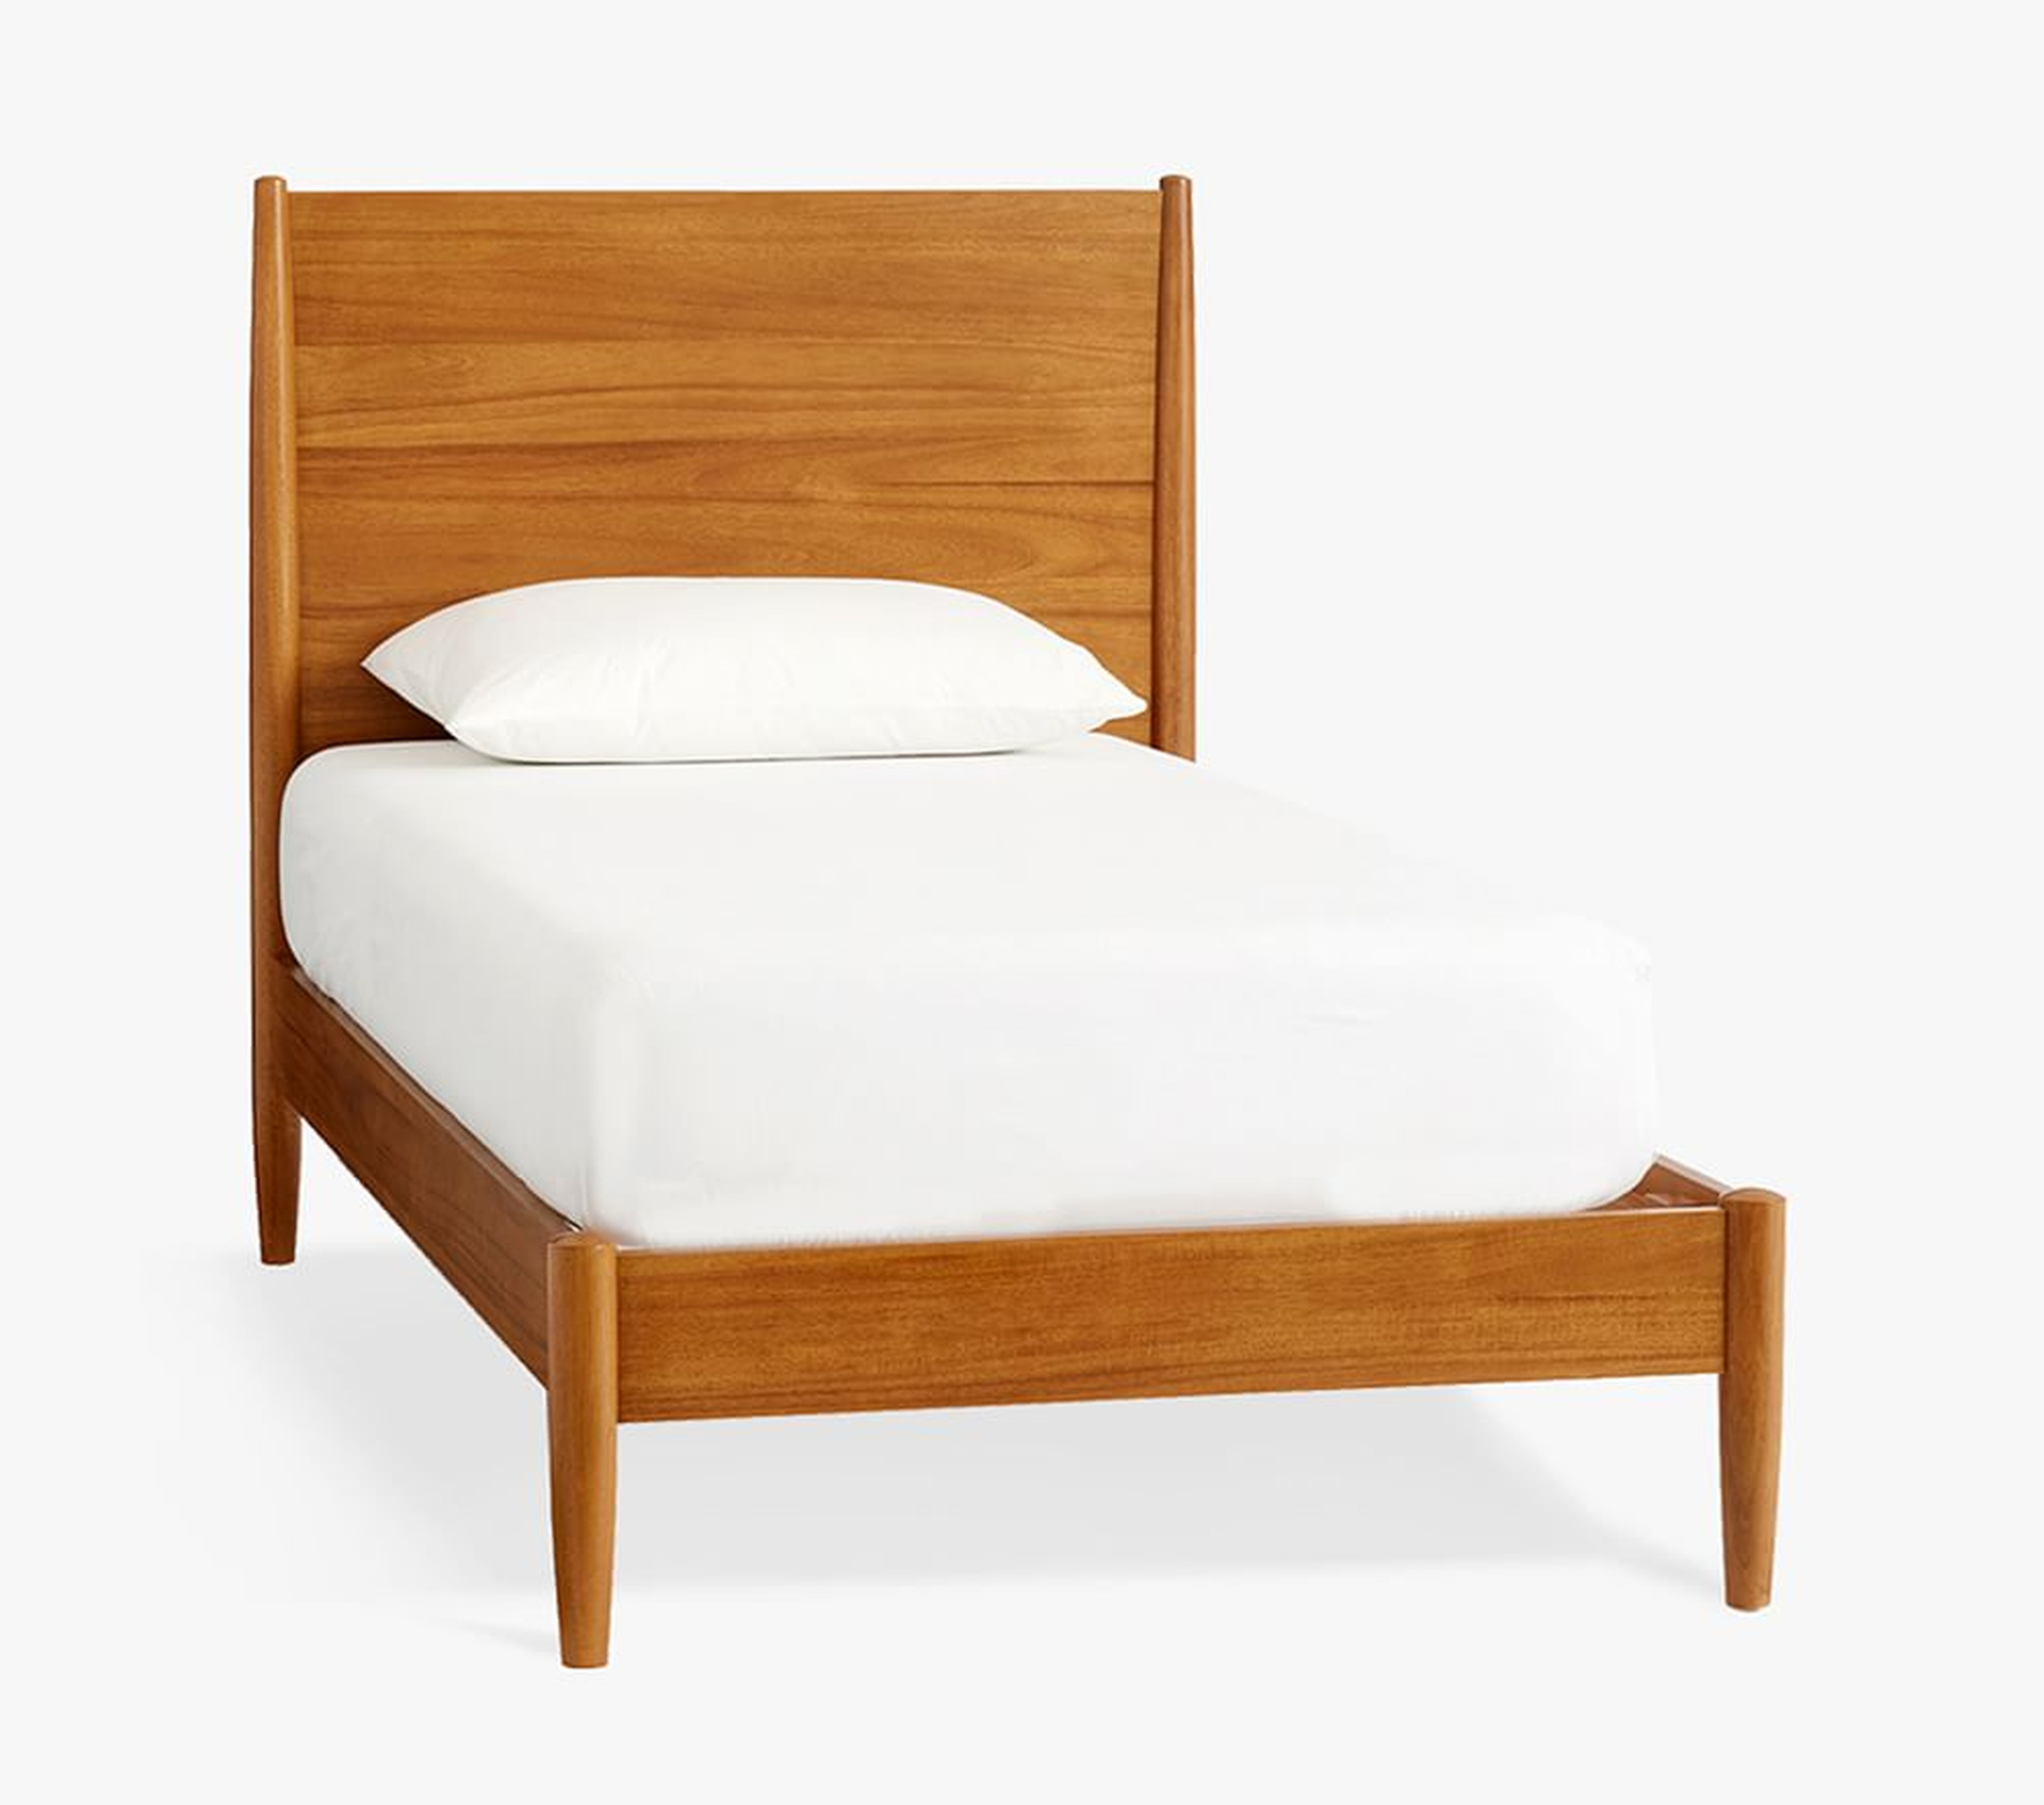 west elm x pbk Mid-Century Bed, Acorn, Twin, In-Home Delivery - Pottery Barn Kids